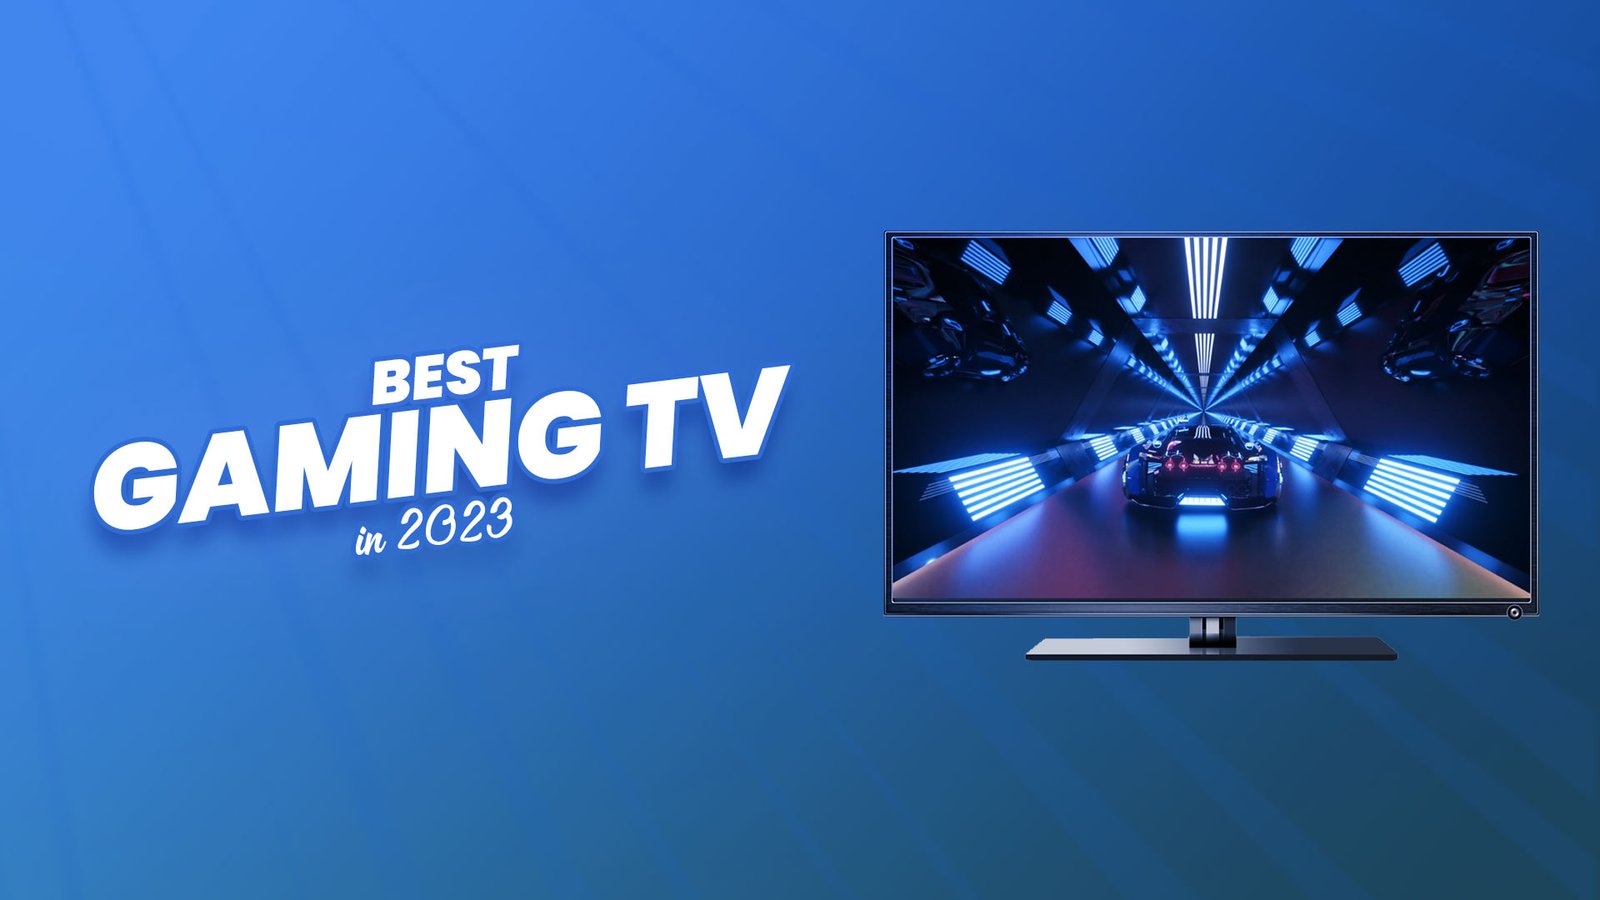 Best Gaming TV for 2023